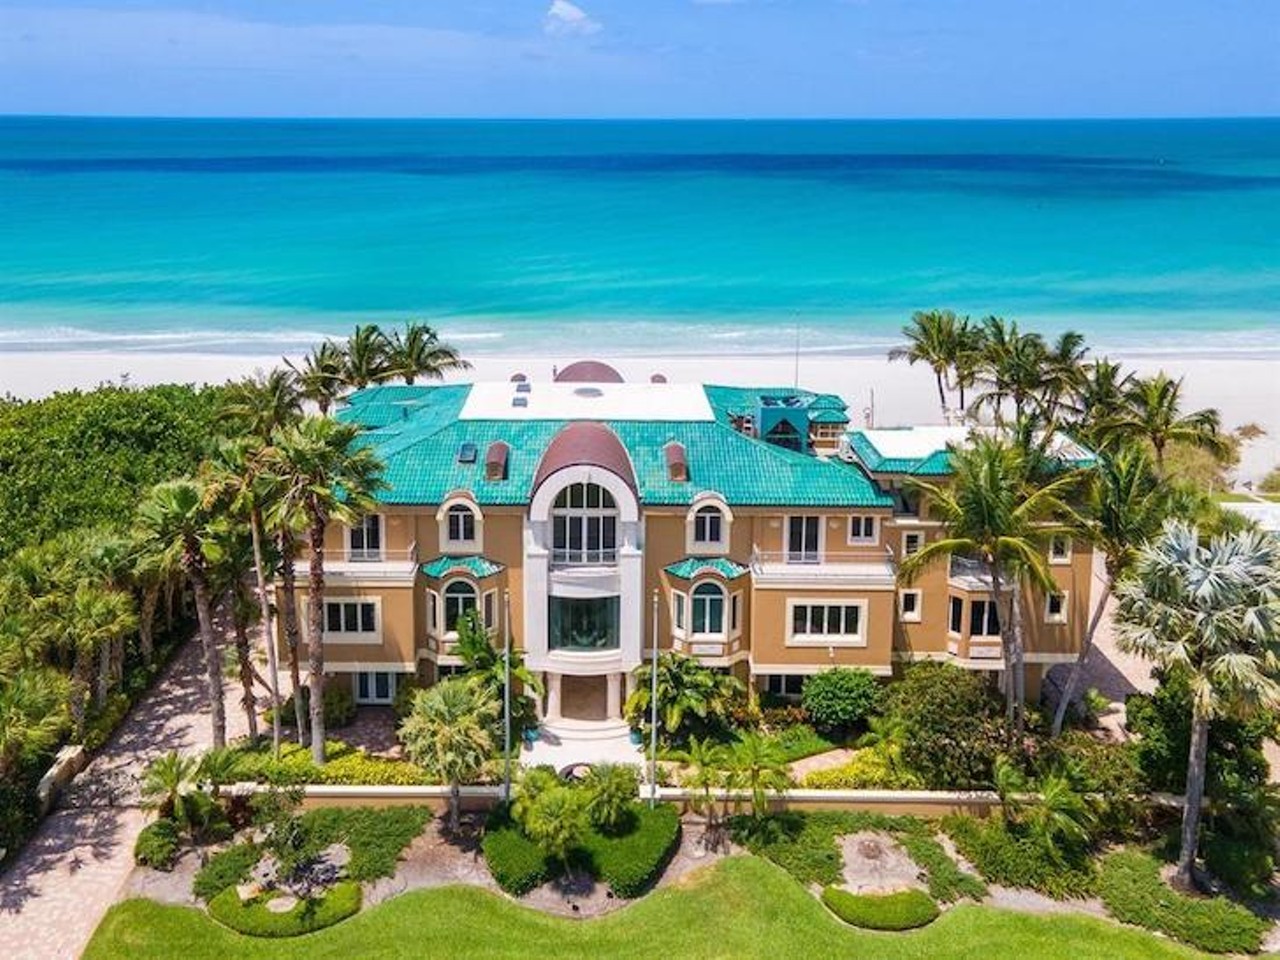 This Tampa Bay mansion looks like a '90s cruise ship, and comes with a waterslide on the roof